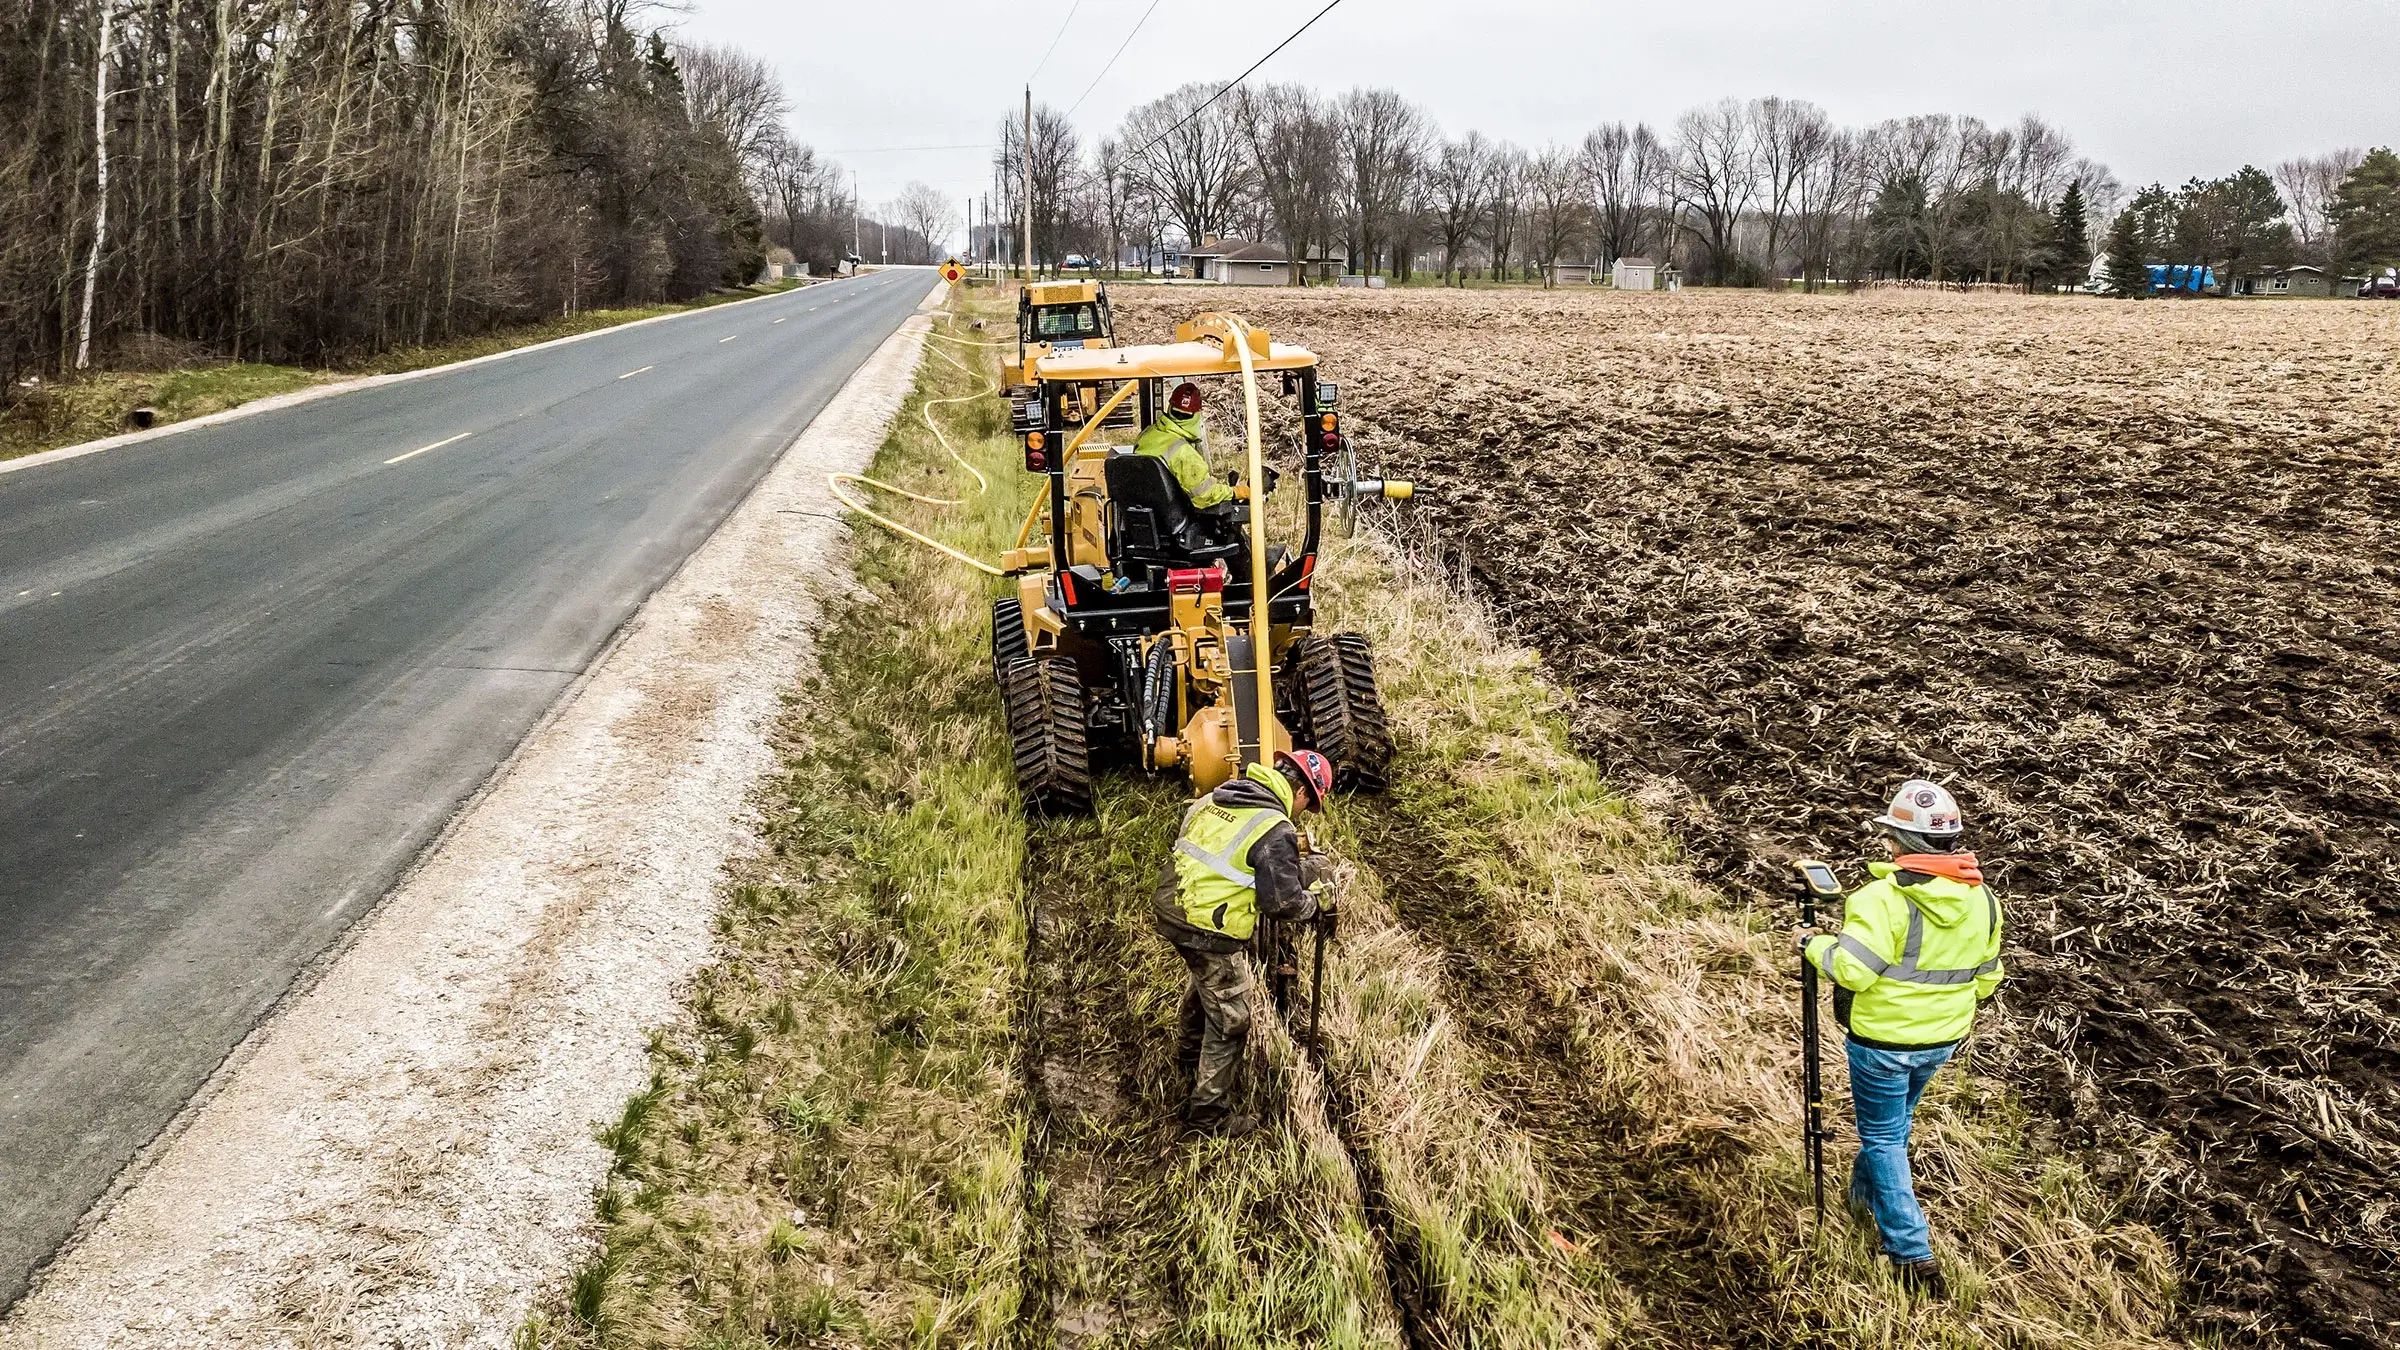 A utlity services crew operates a machine as it lays pipeline in ground near roadside.